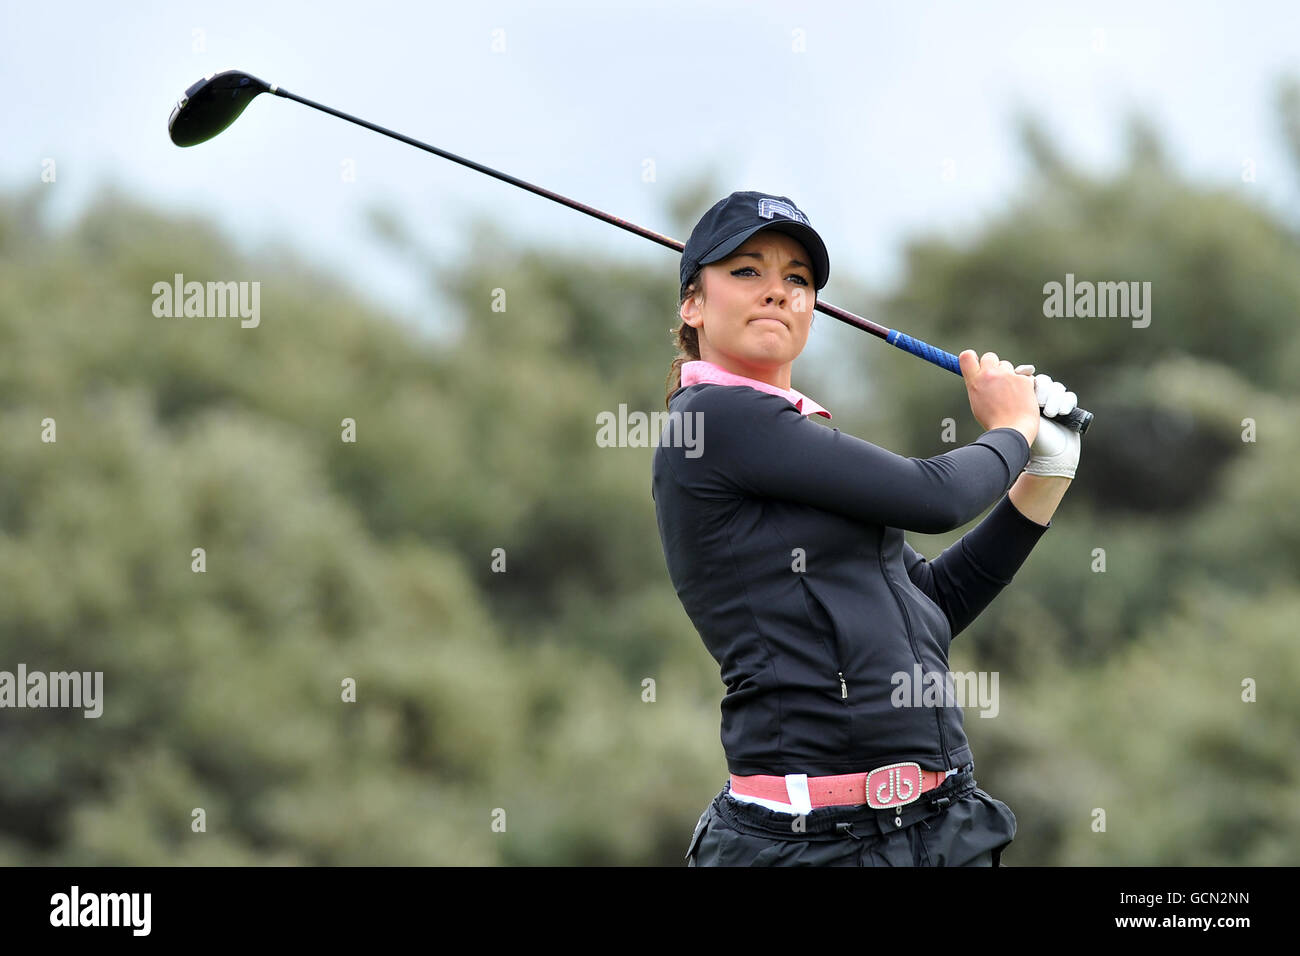 England's Kelly Tidy tees off during the first round of the Ricoh Women's British Open at the Royal Birkdale Golf Club, Southport. Stock Photo